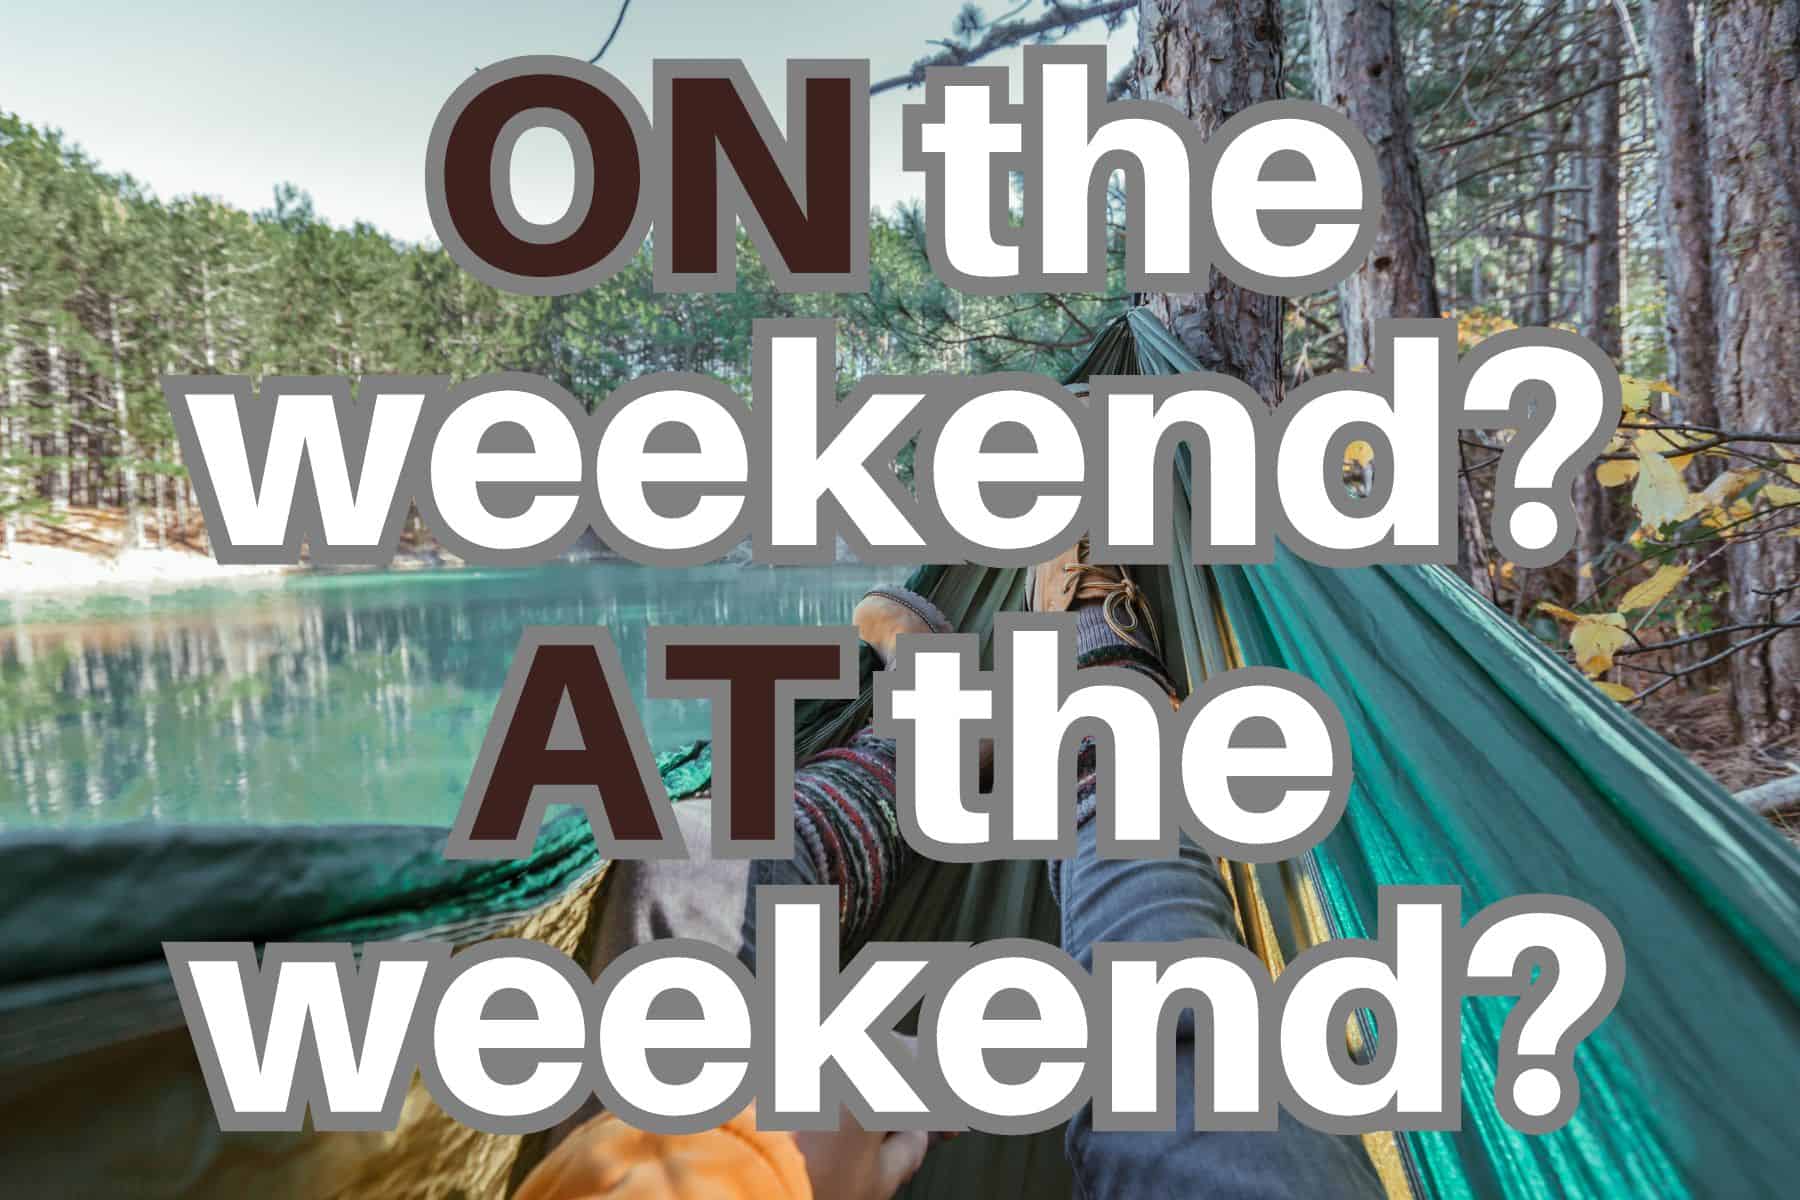 ON the weekend? AT the weekend? – Which preposition is correct?